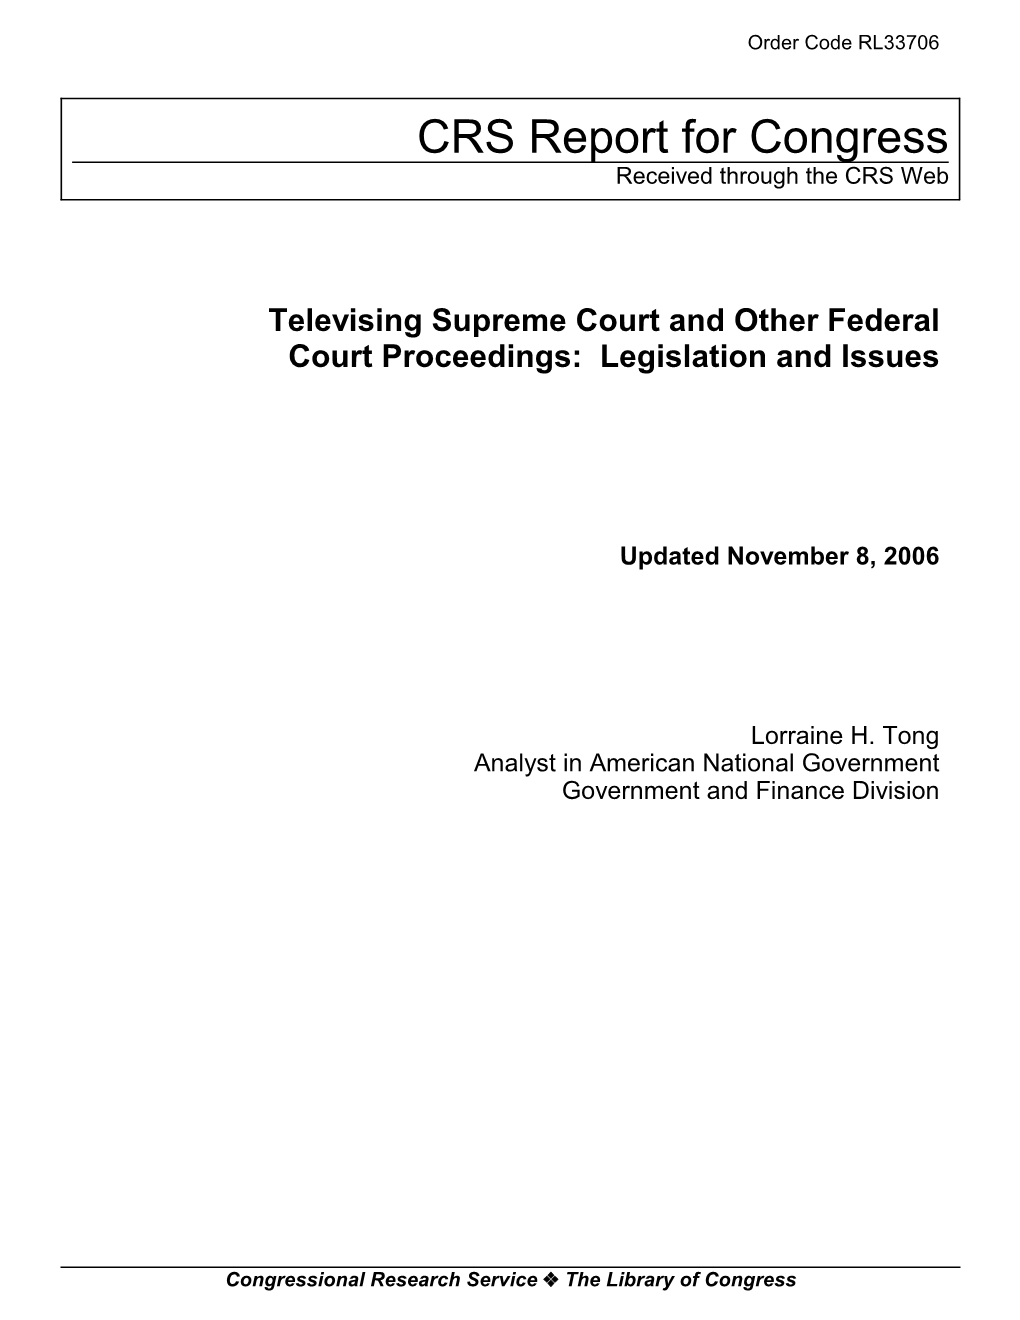 Televising Supreme Court and Other Federal Court Proceedings: Legislation and Issues